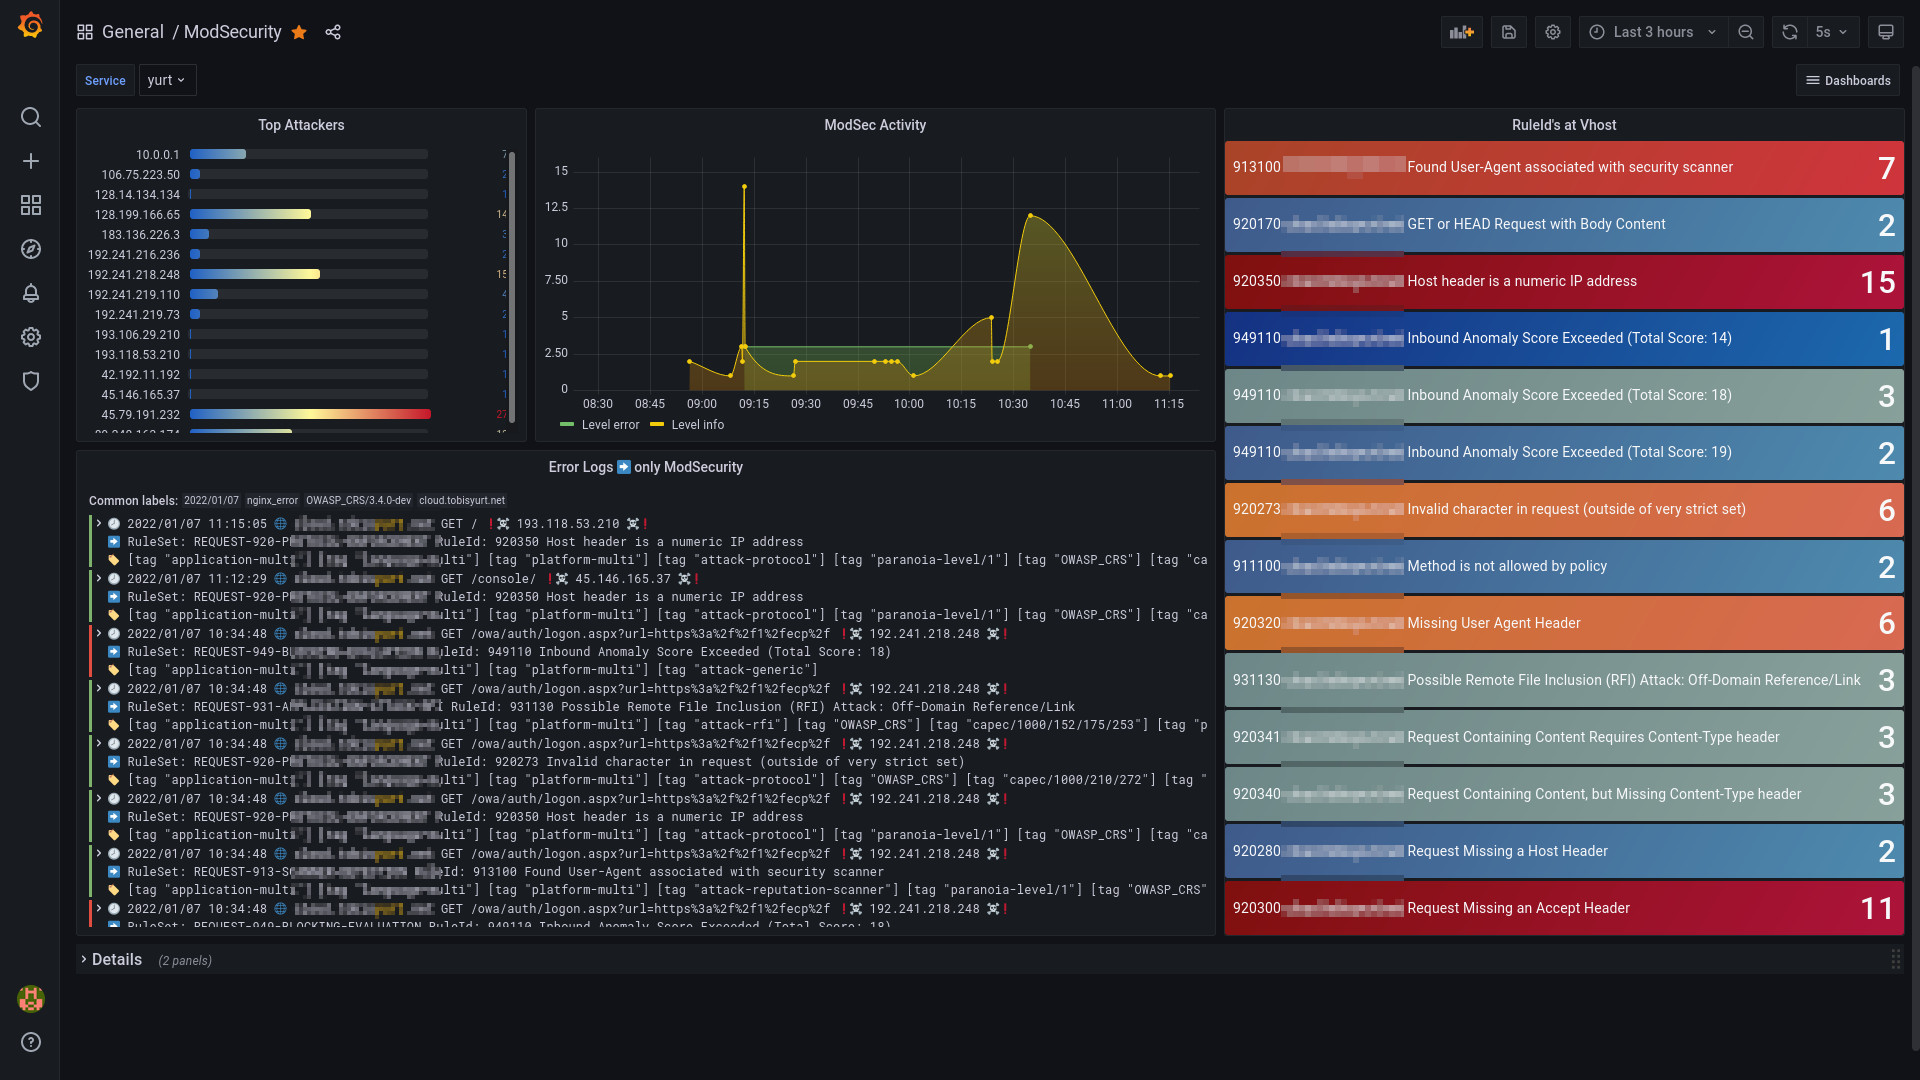 Grafana Modsecurity Dashboard Overview